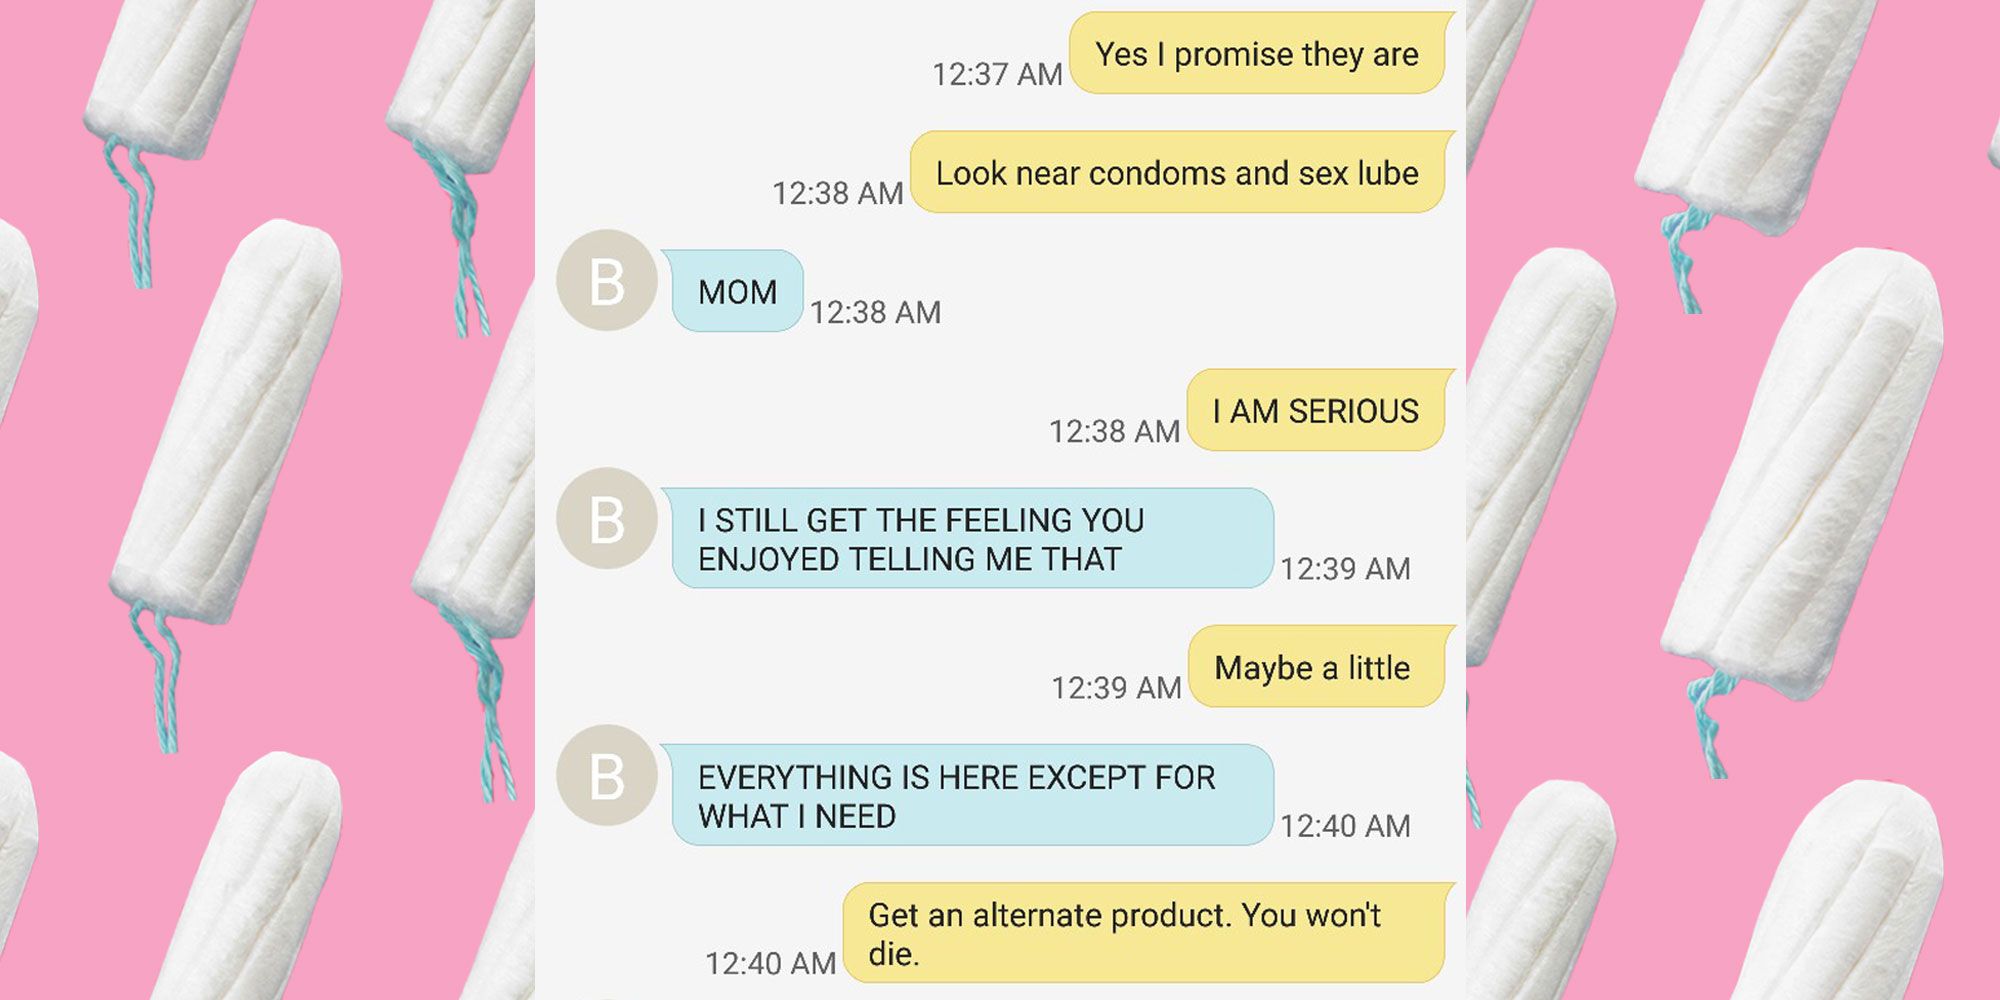 This Text Exchange About Tampons Between a Mom and Daughter Is Hilarious